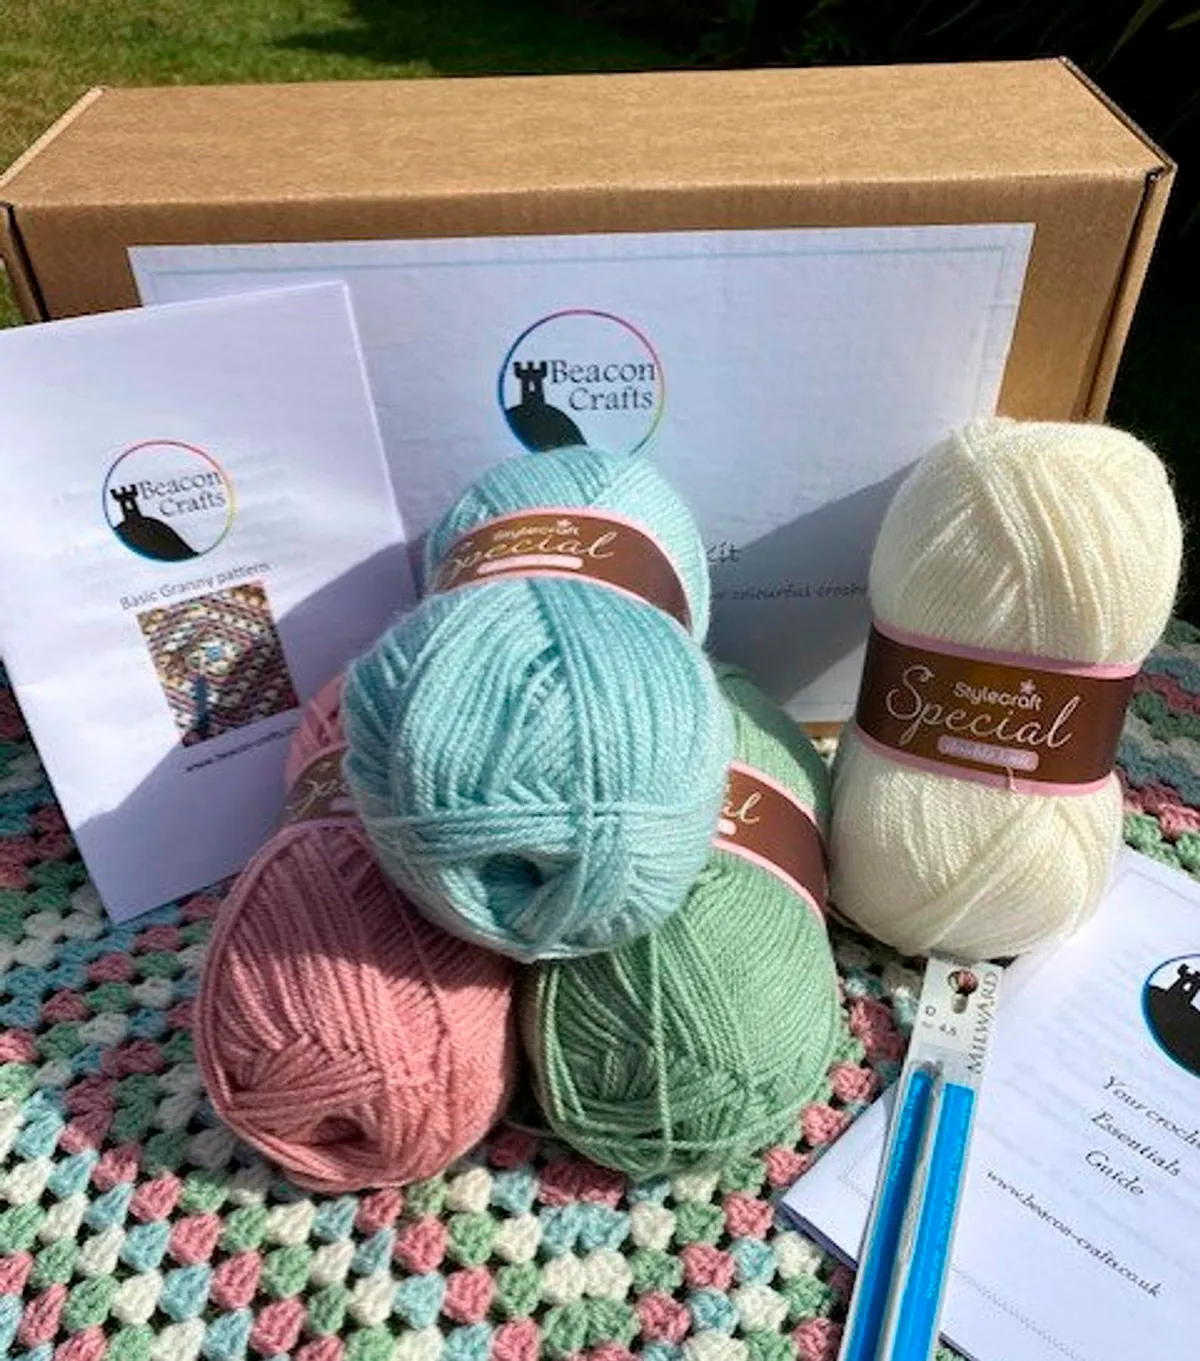 Best crochet kits for beginners to advanced